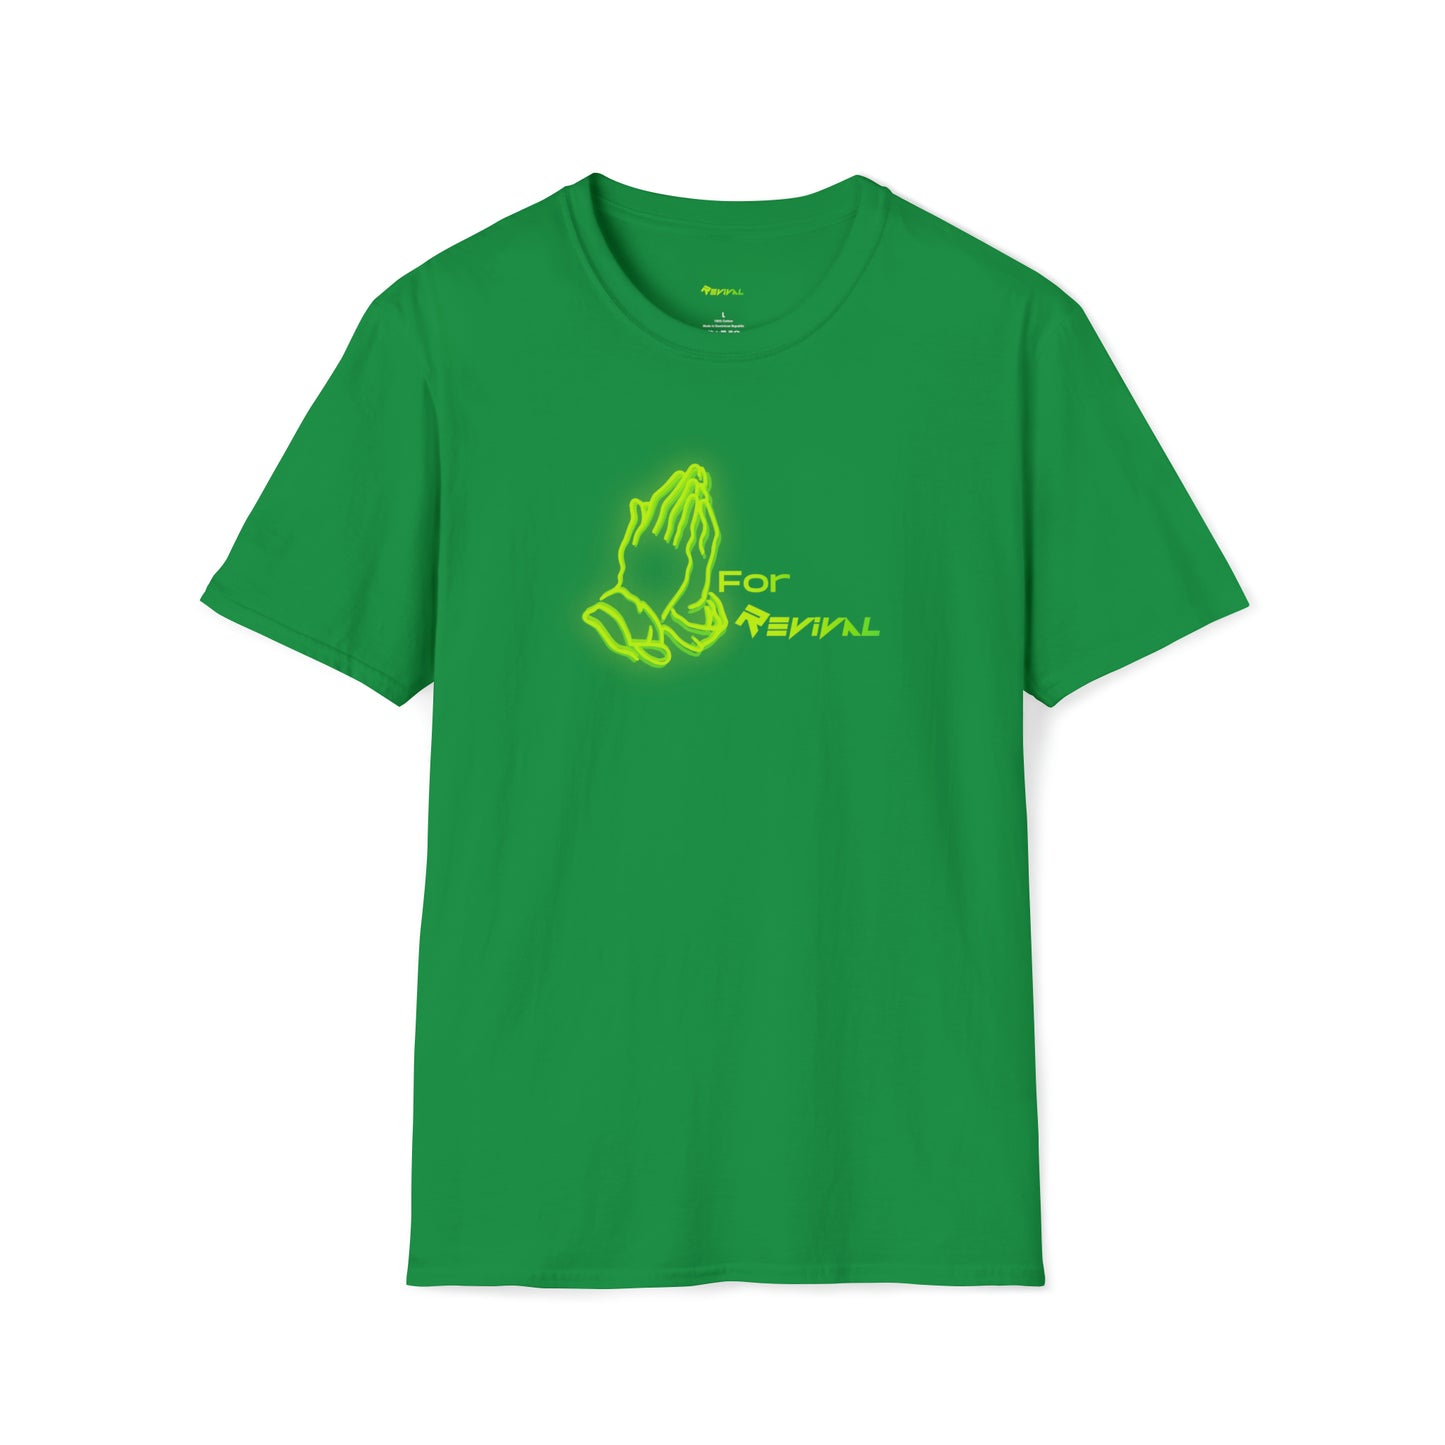 Pray for Revival Neon Green by Revival Softstyle T-Shirt, Short Sleeved Tee for Men and Women, Gift for Men, Gift for Women